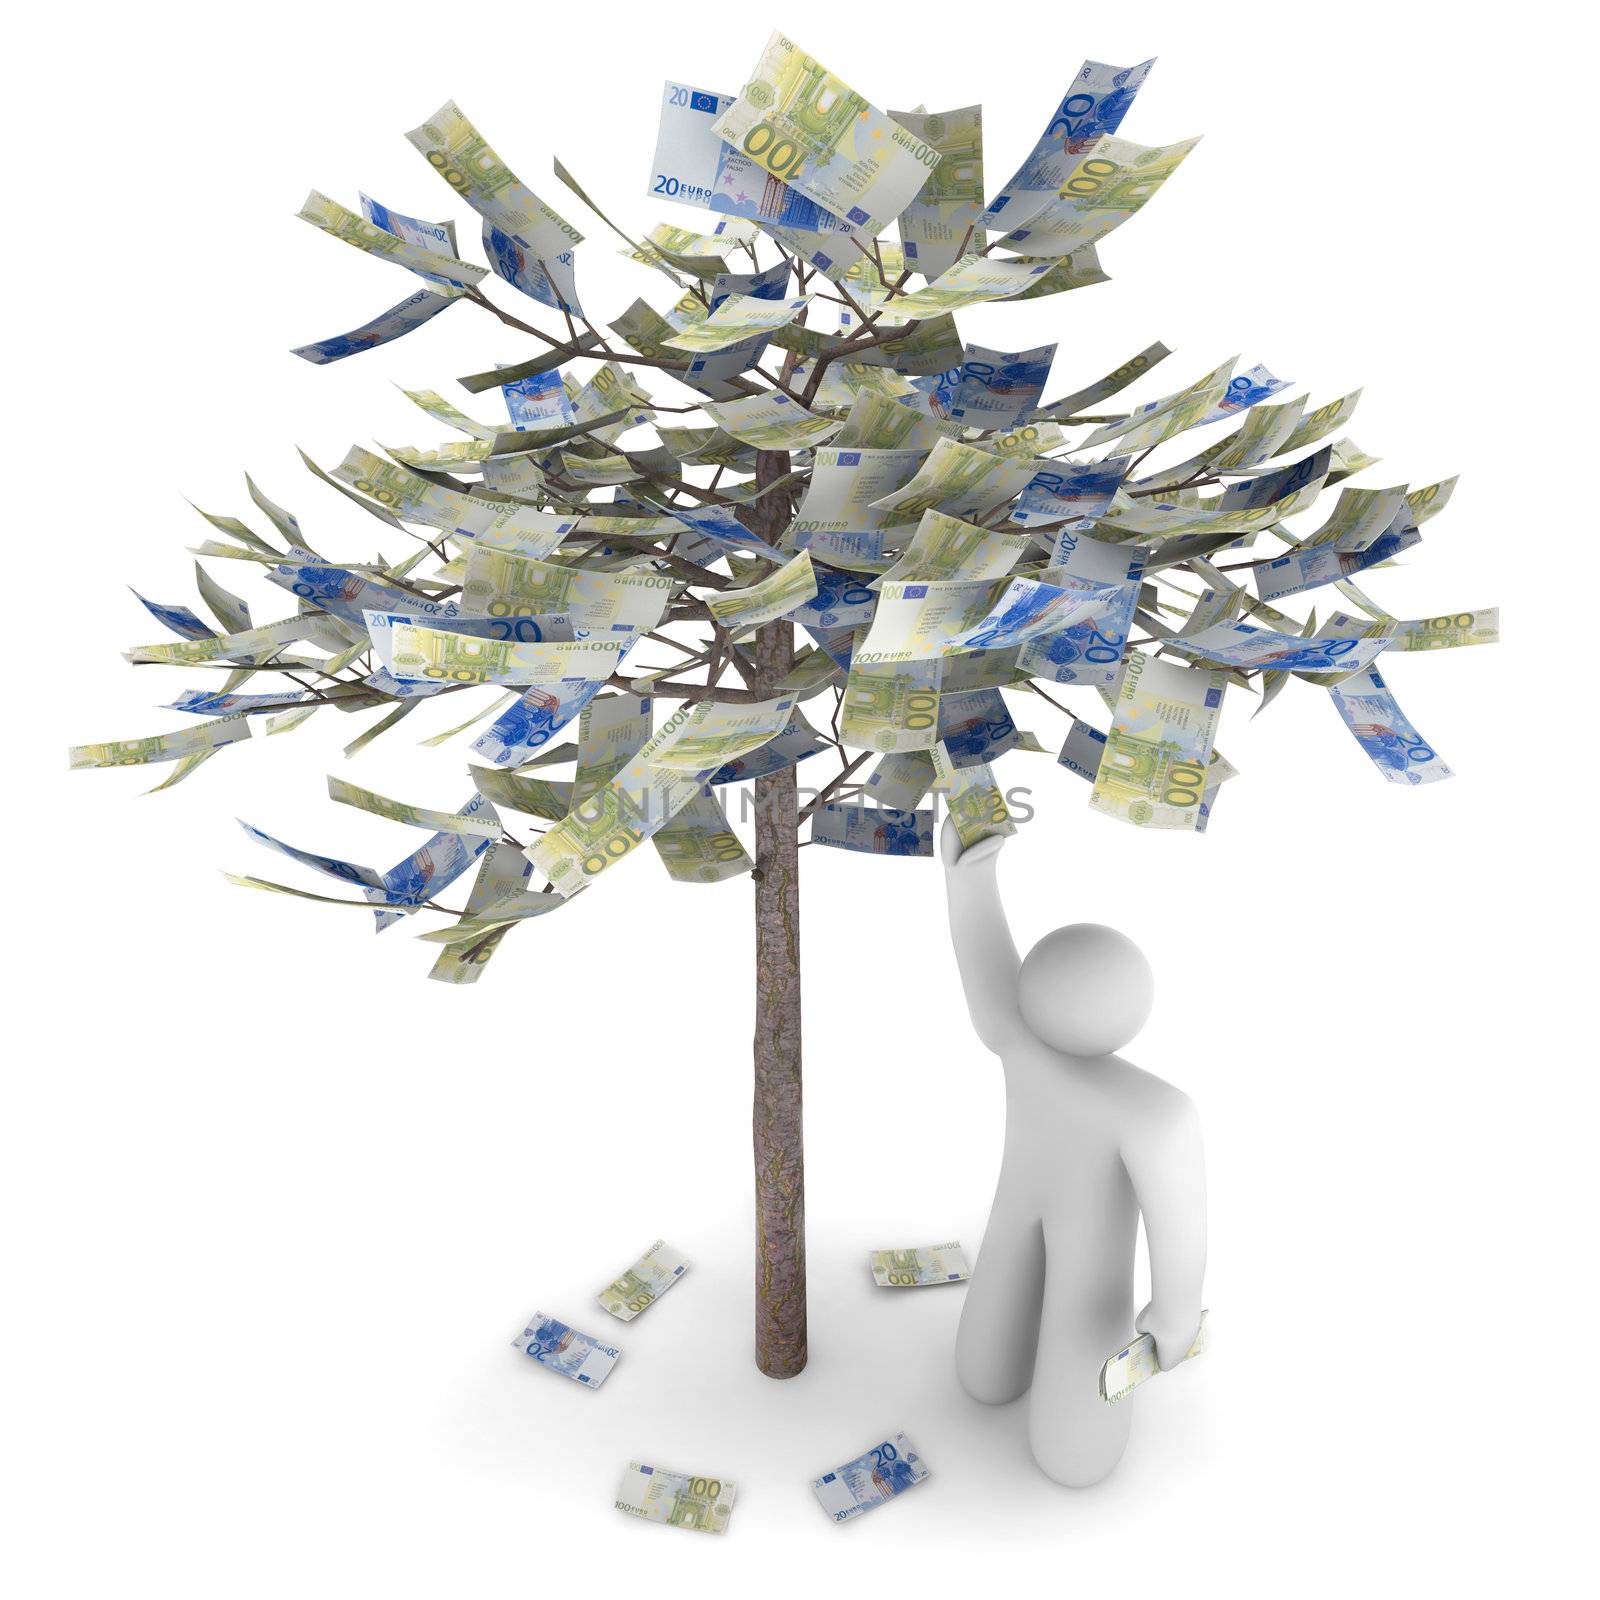 A money tree full of Euros and a man picking them off